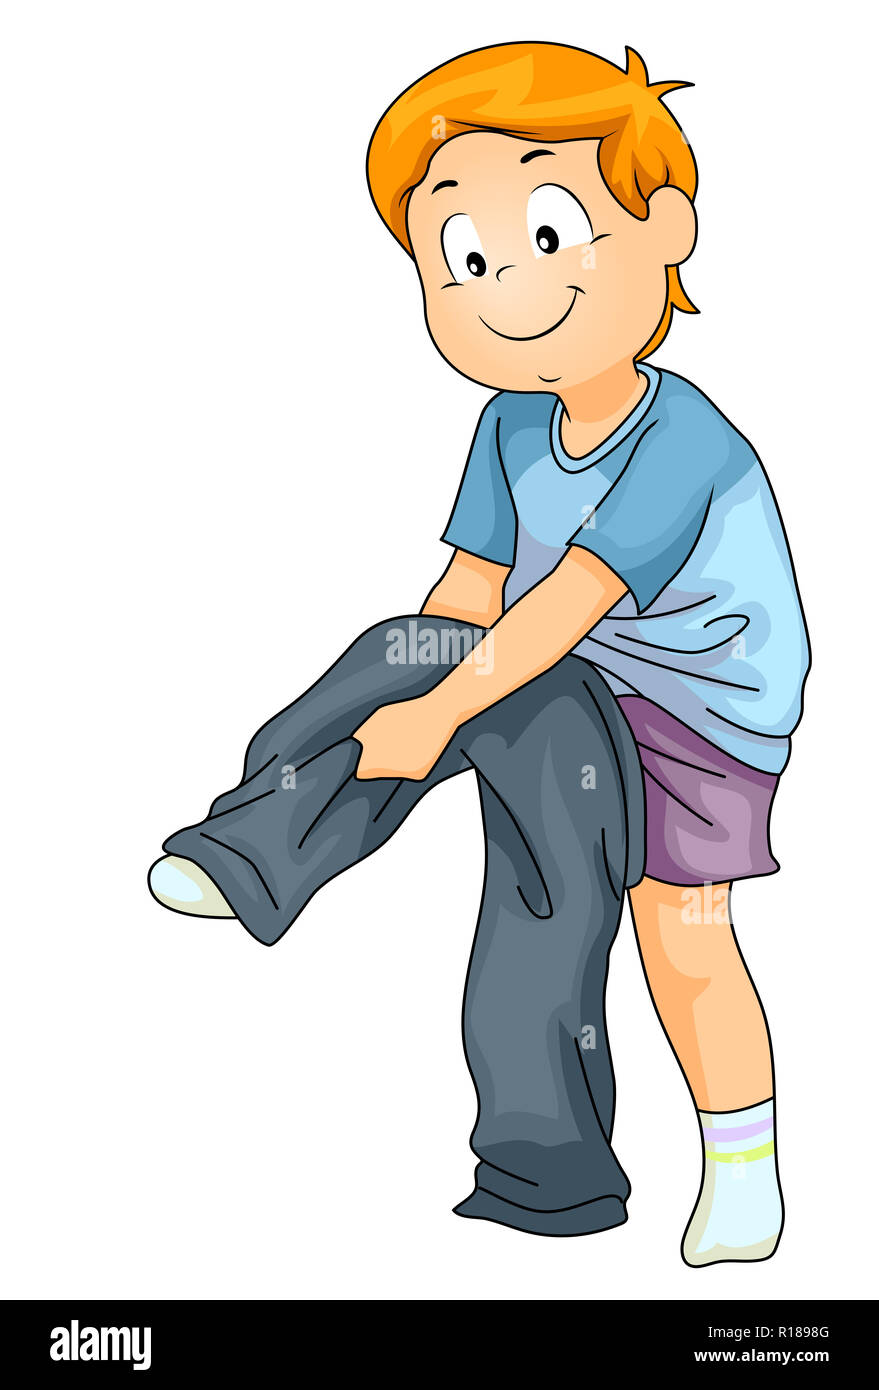 Illustration of a Kid Boy Putting On His Pants as Part of Independent ...